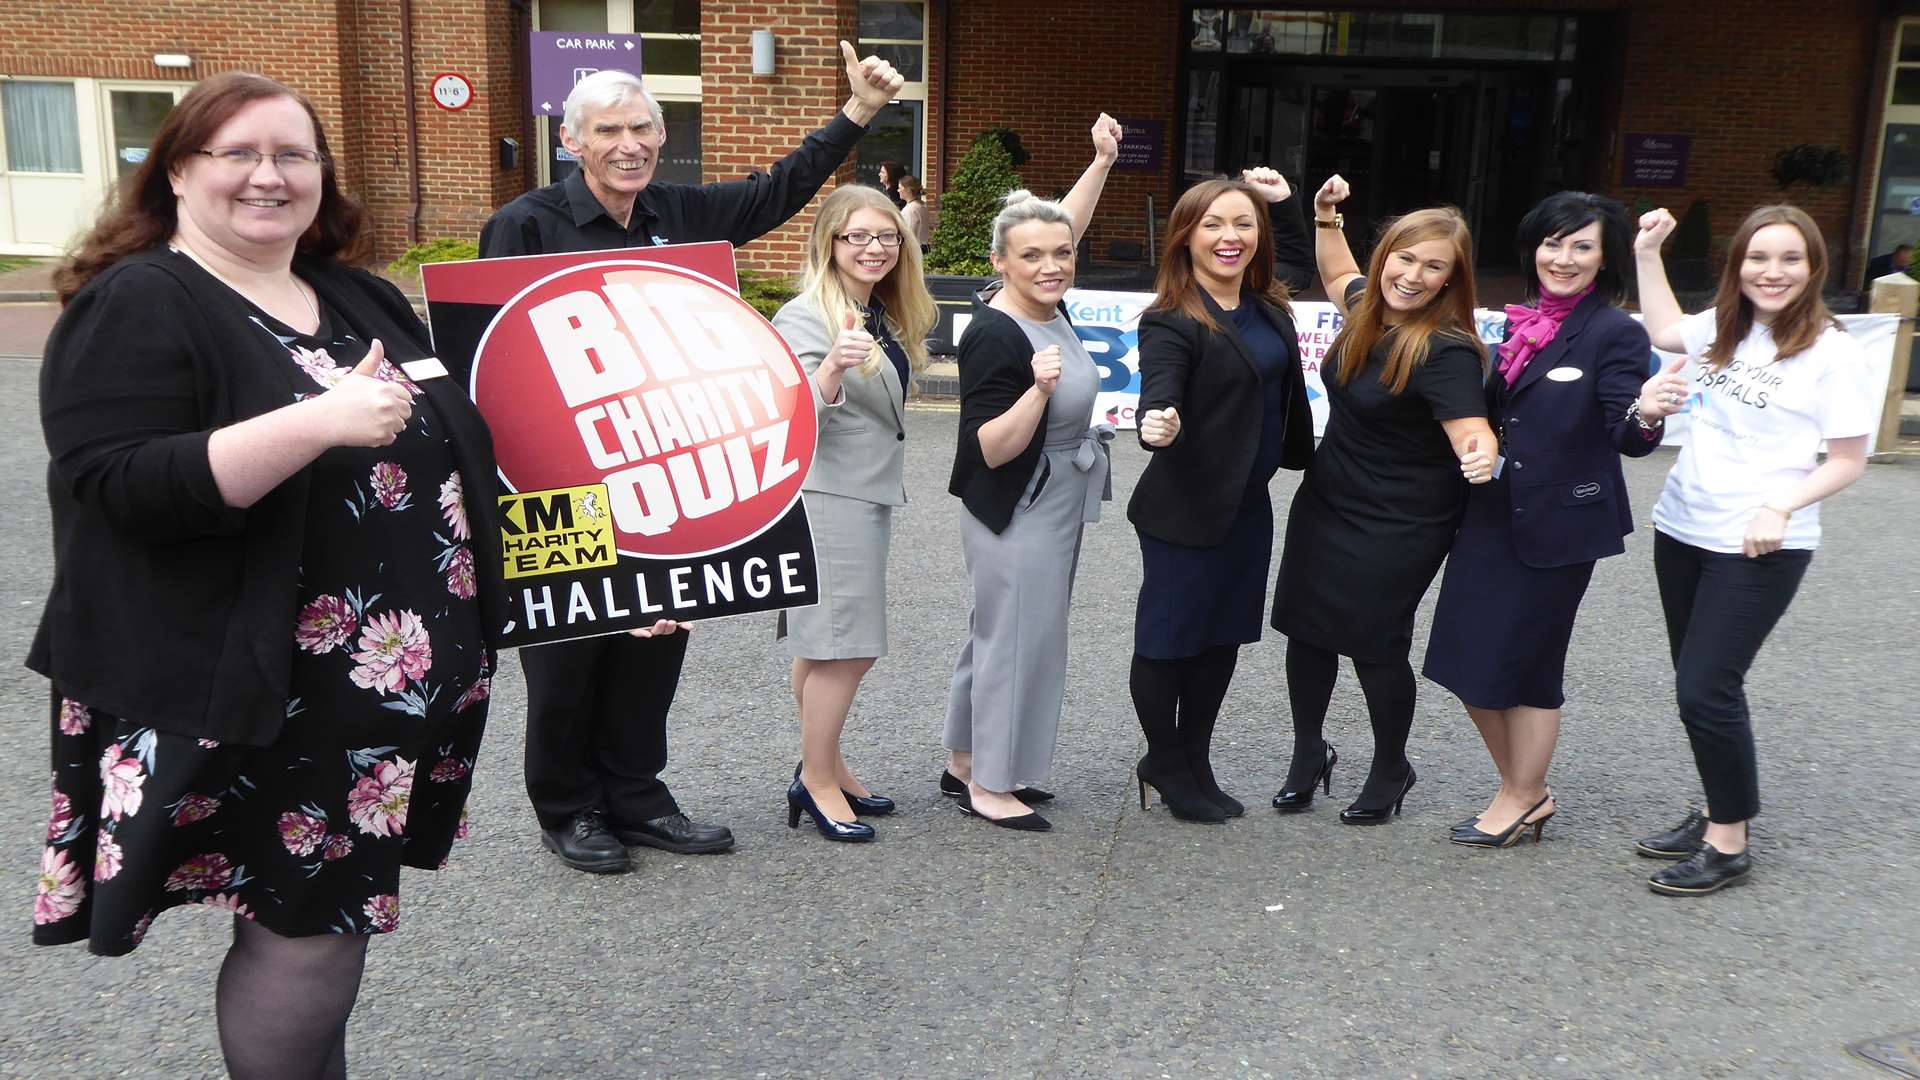 Rebecca Naylor of Ashford International Hotel launches the KM Big Charity Quiz with key partners Hallett and Co, Specsavers, Office Angels, and East Kent Hospitals Charity.